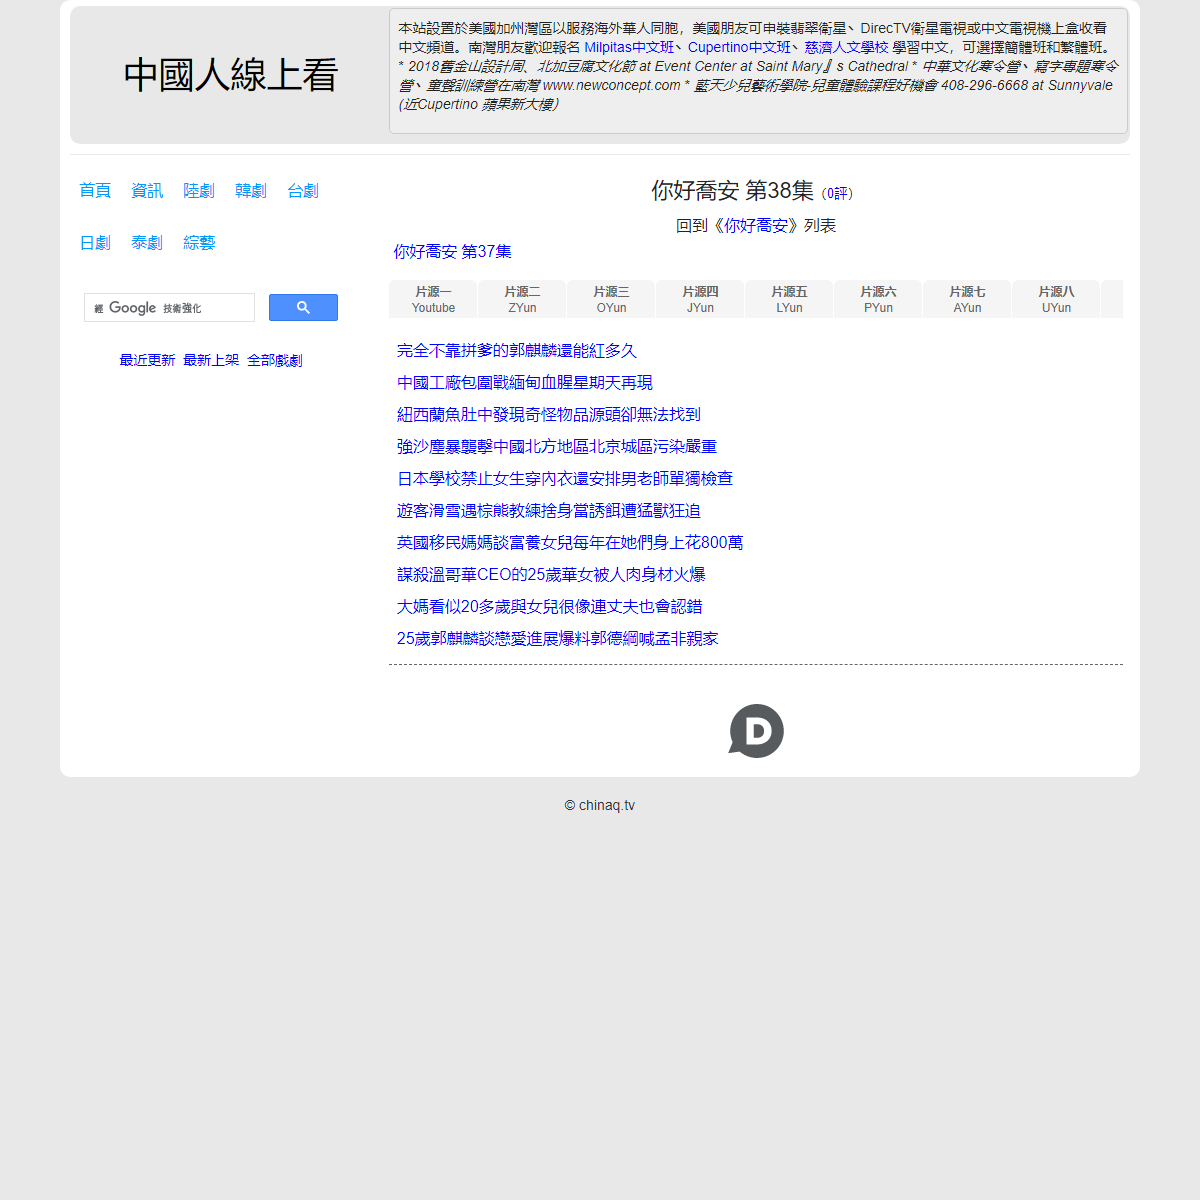 A complete backup of https://chinaq.tv/hello-joann/38.html